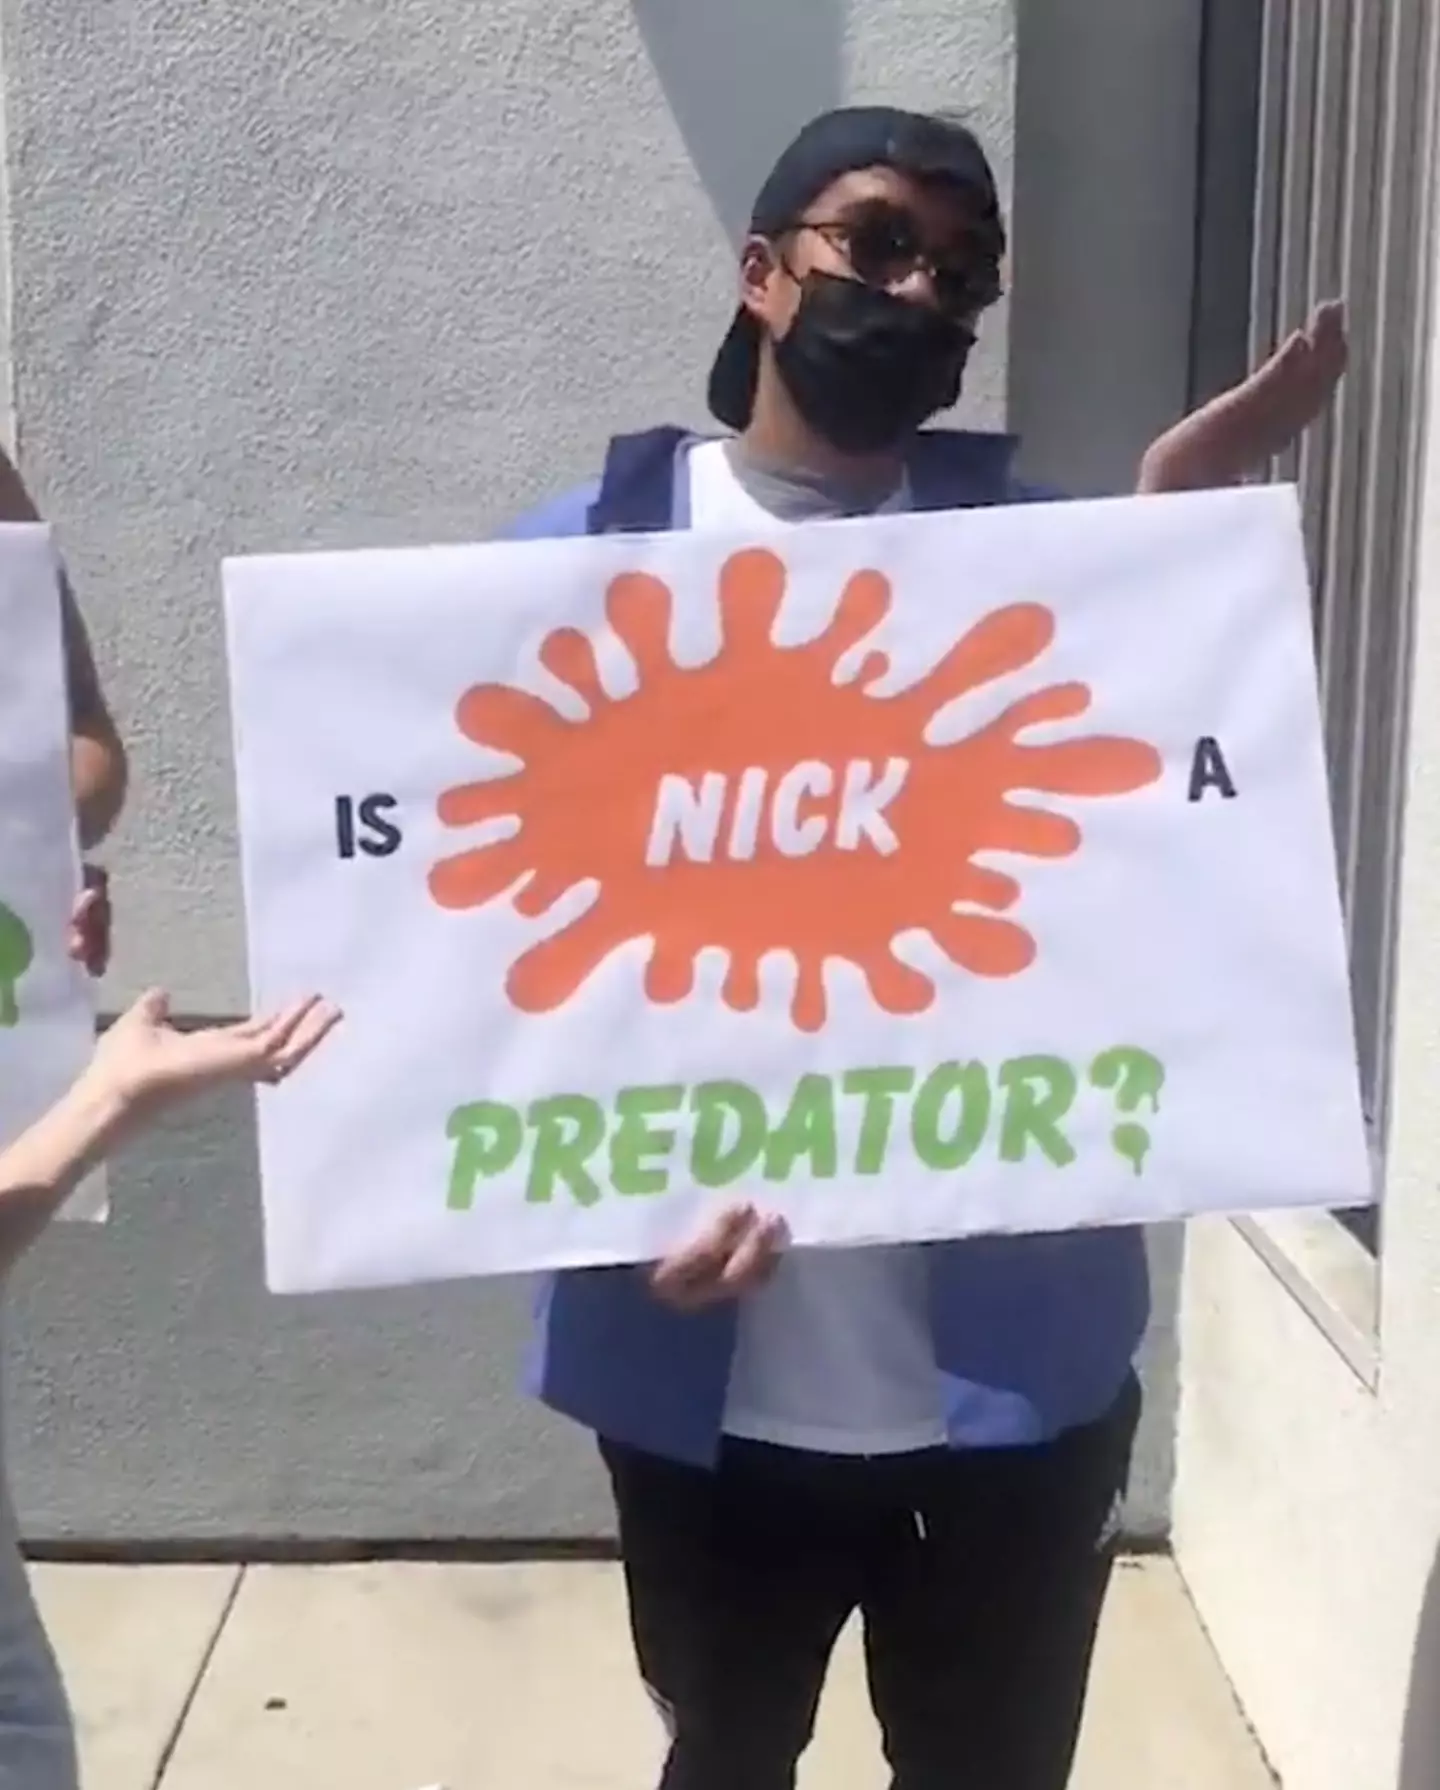 The actor led a demonstration outside the Nickelodeon headquarters.